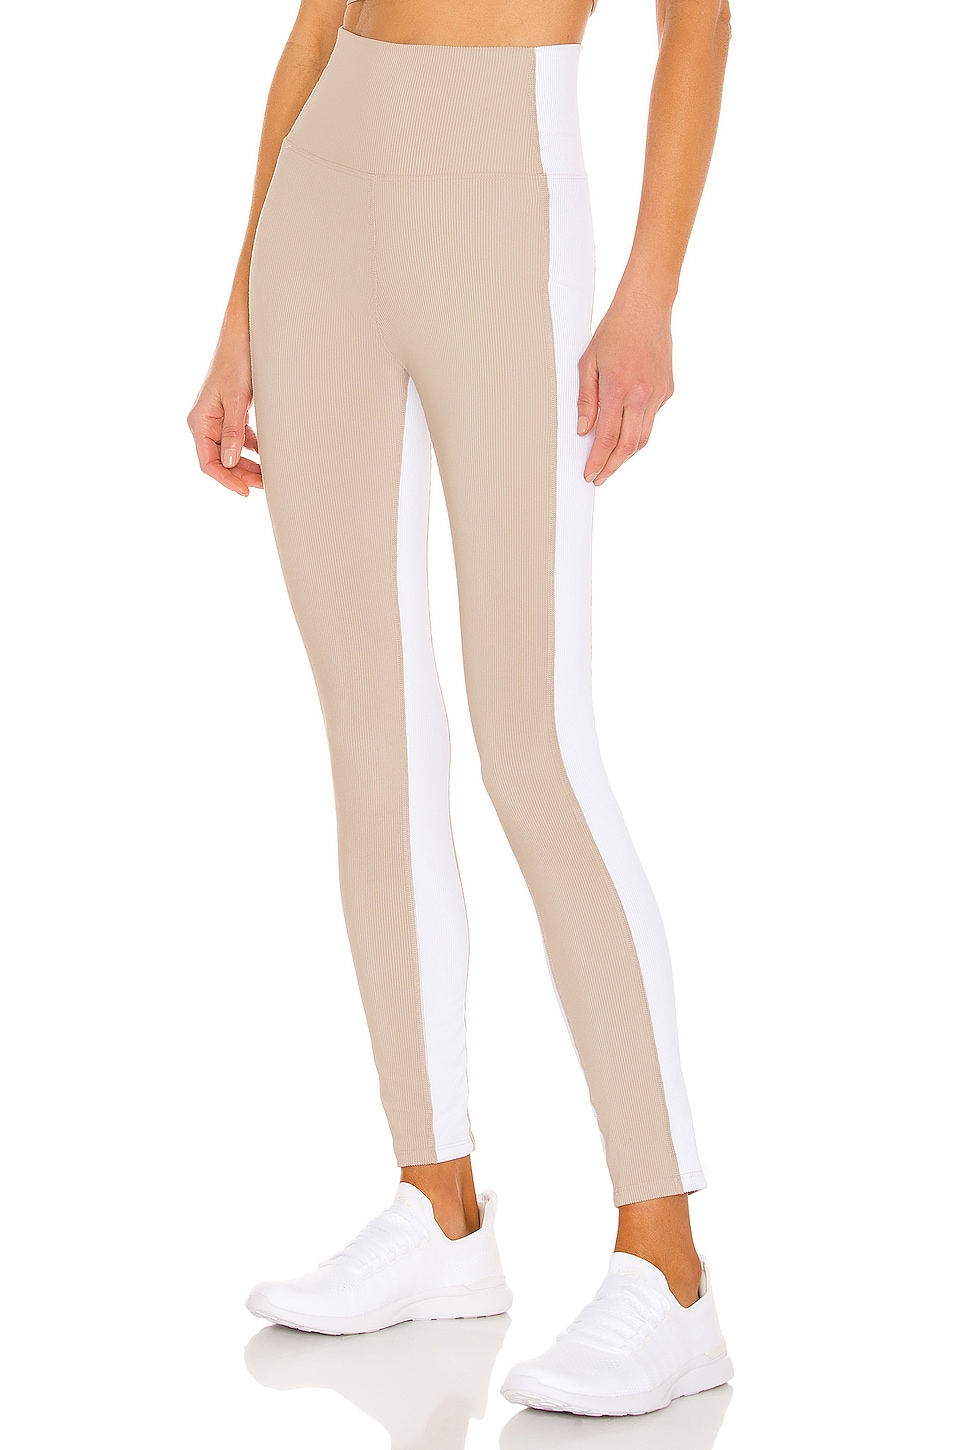 Beige and white leggings from Beach Rior